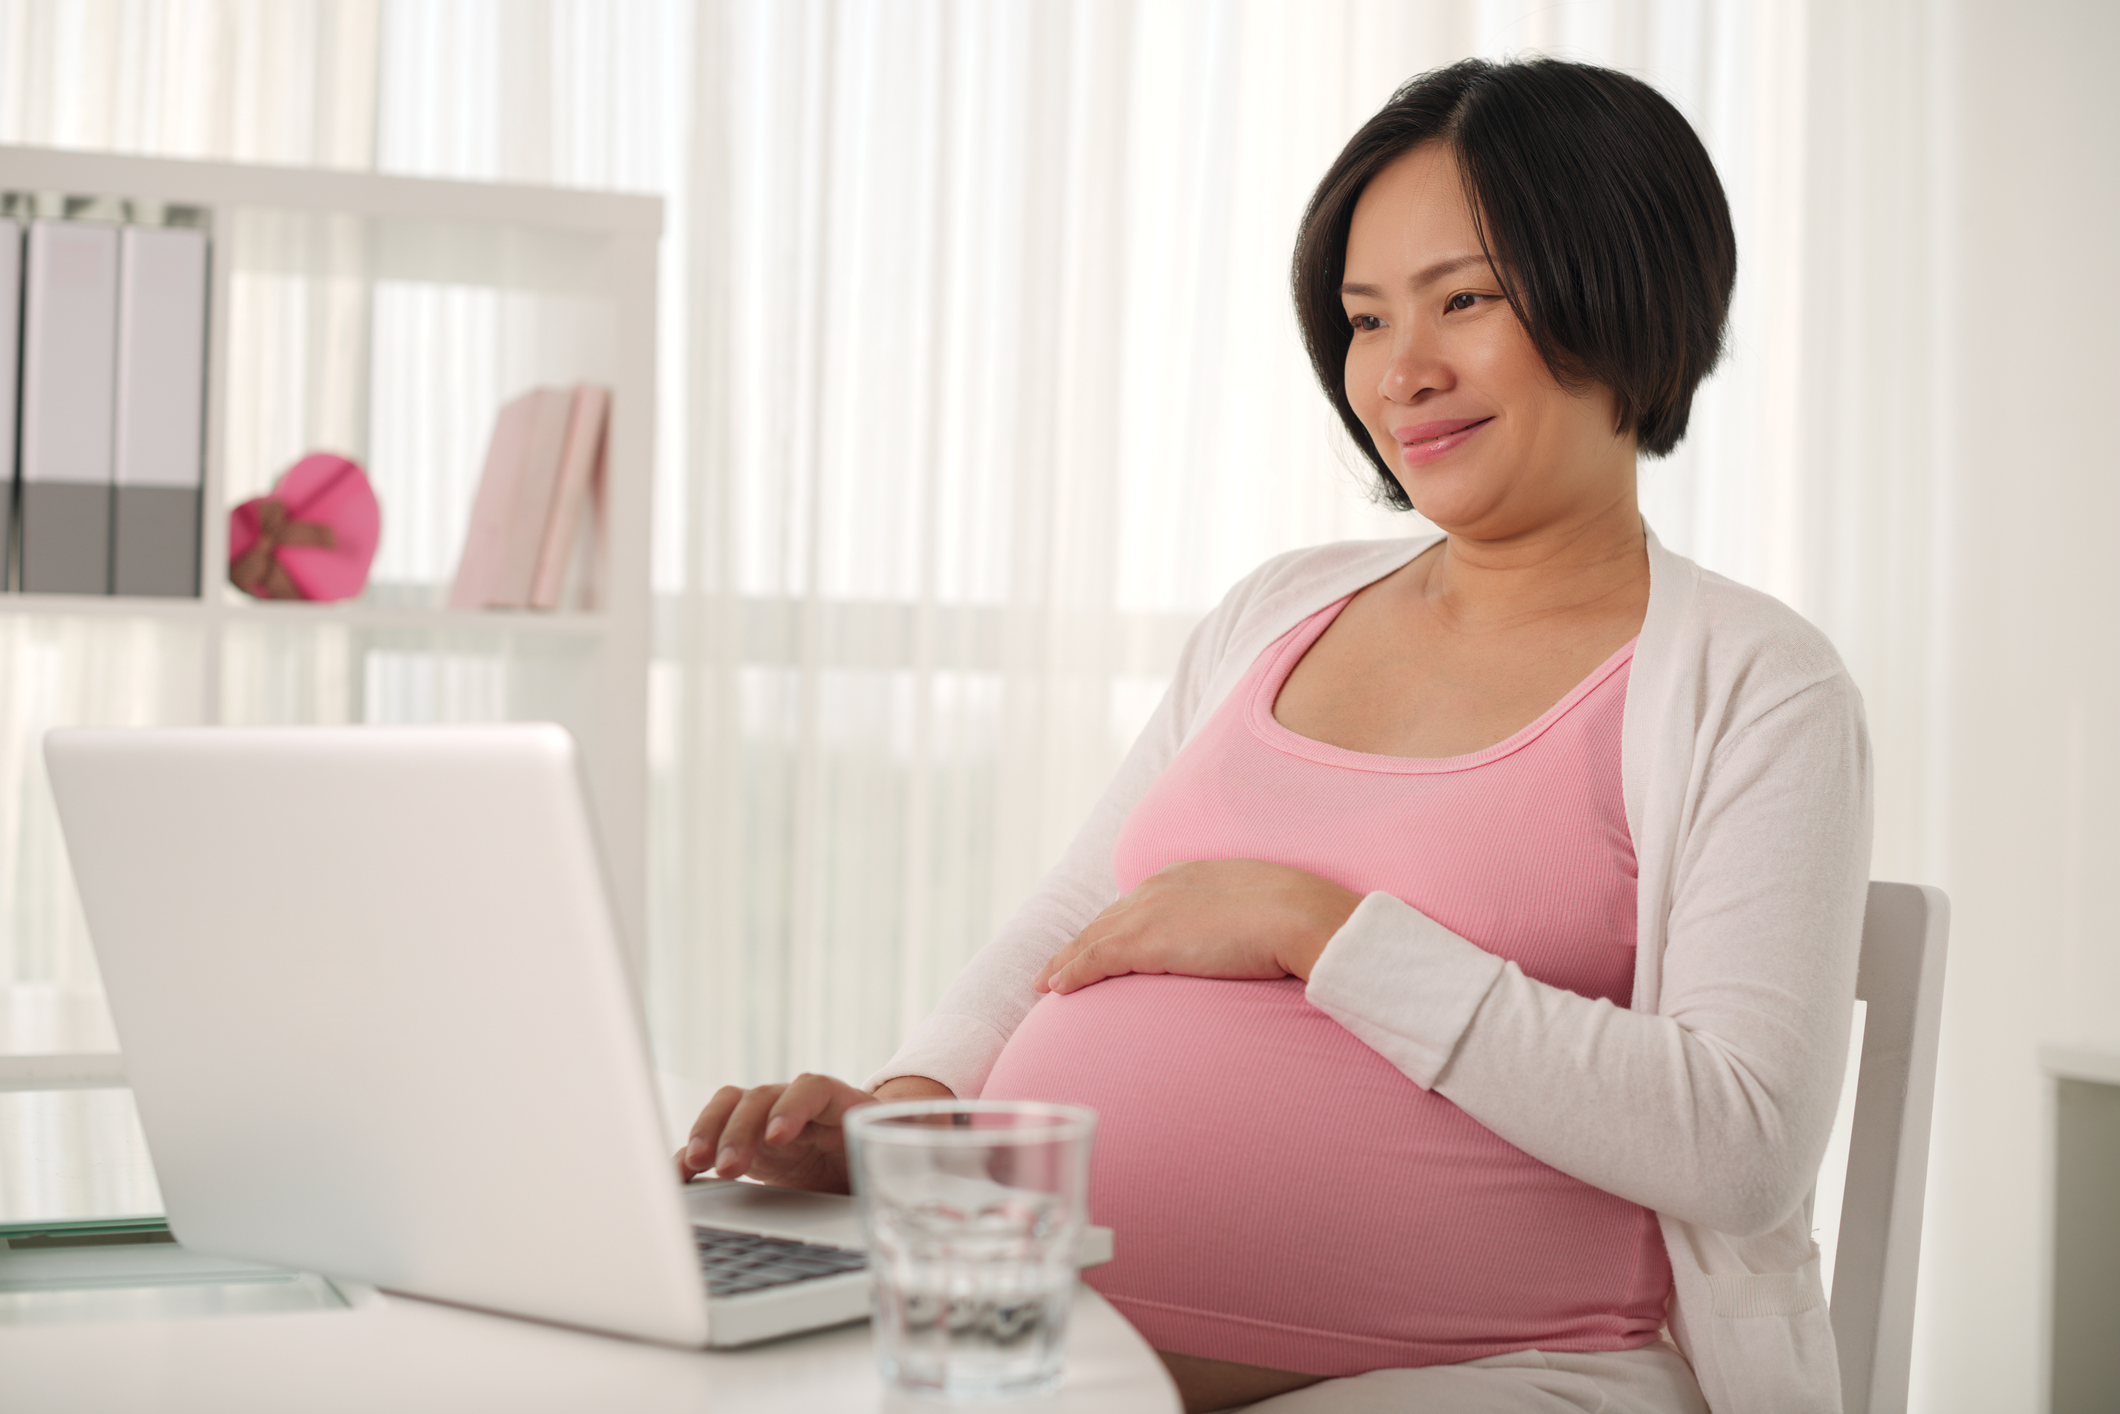 Pregnant Woman Working from Home - stock photo